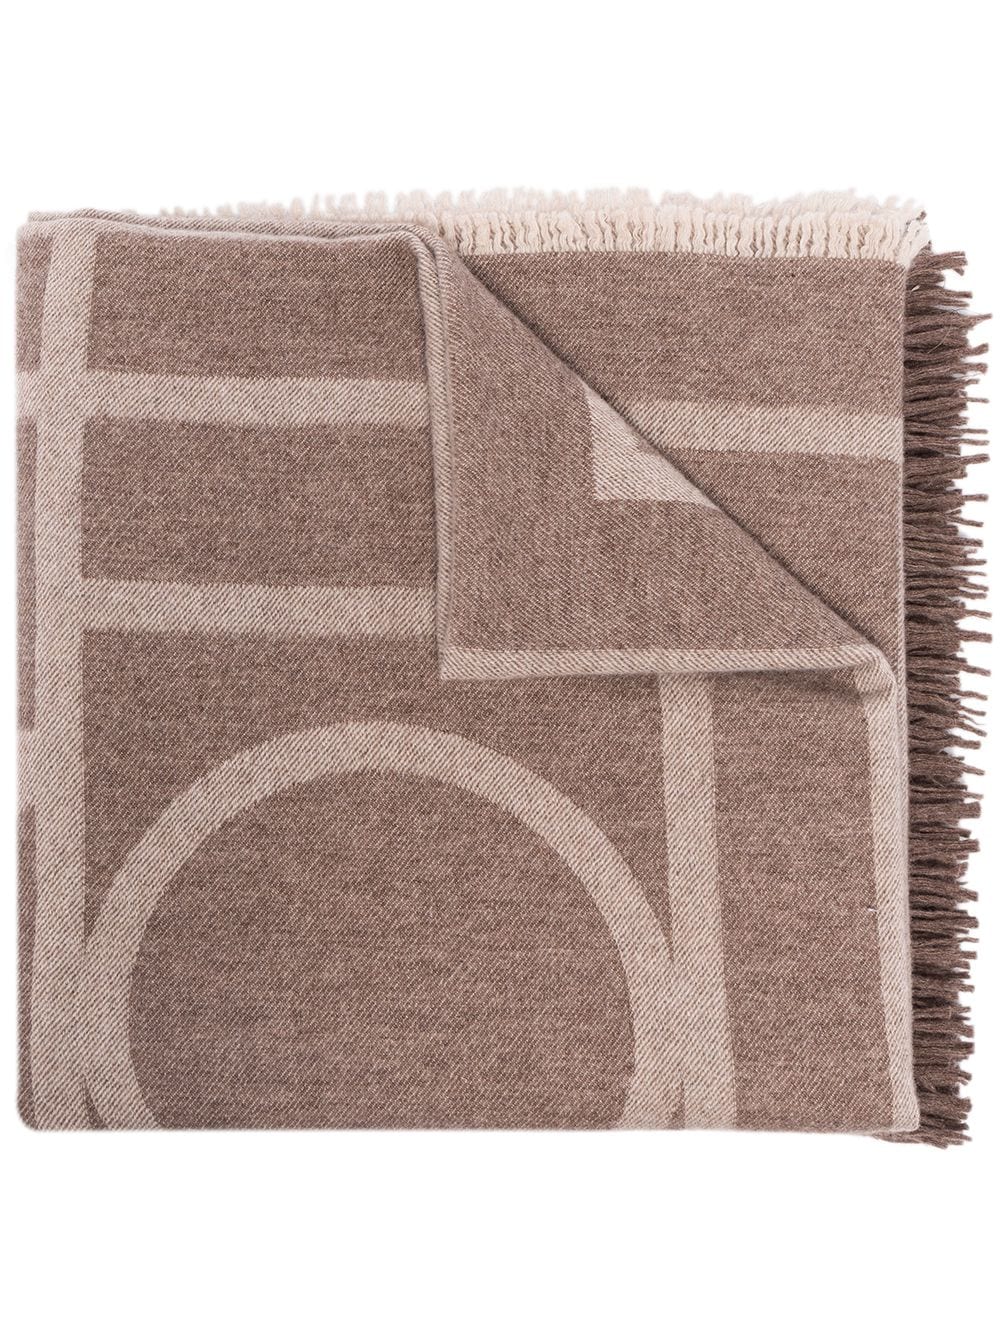 Toteme TOTEME- Monogram Wool And Cashmere Blend Scarf